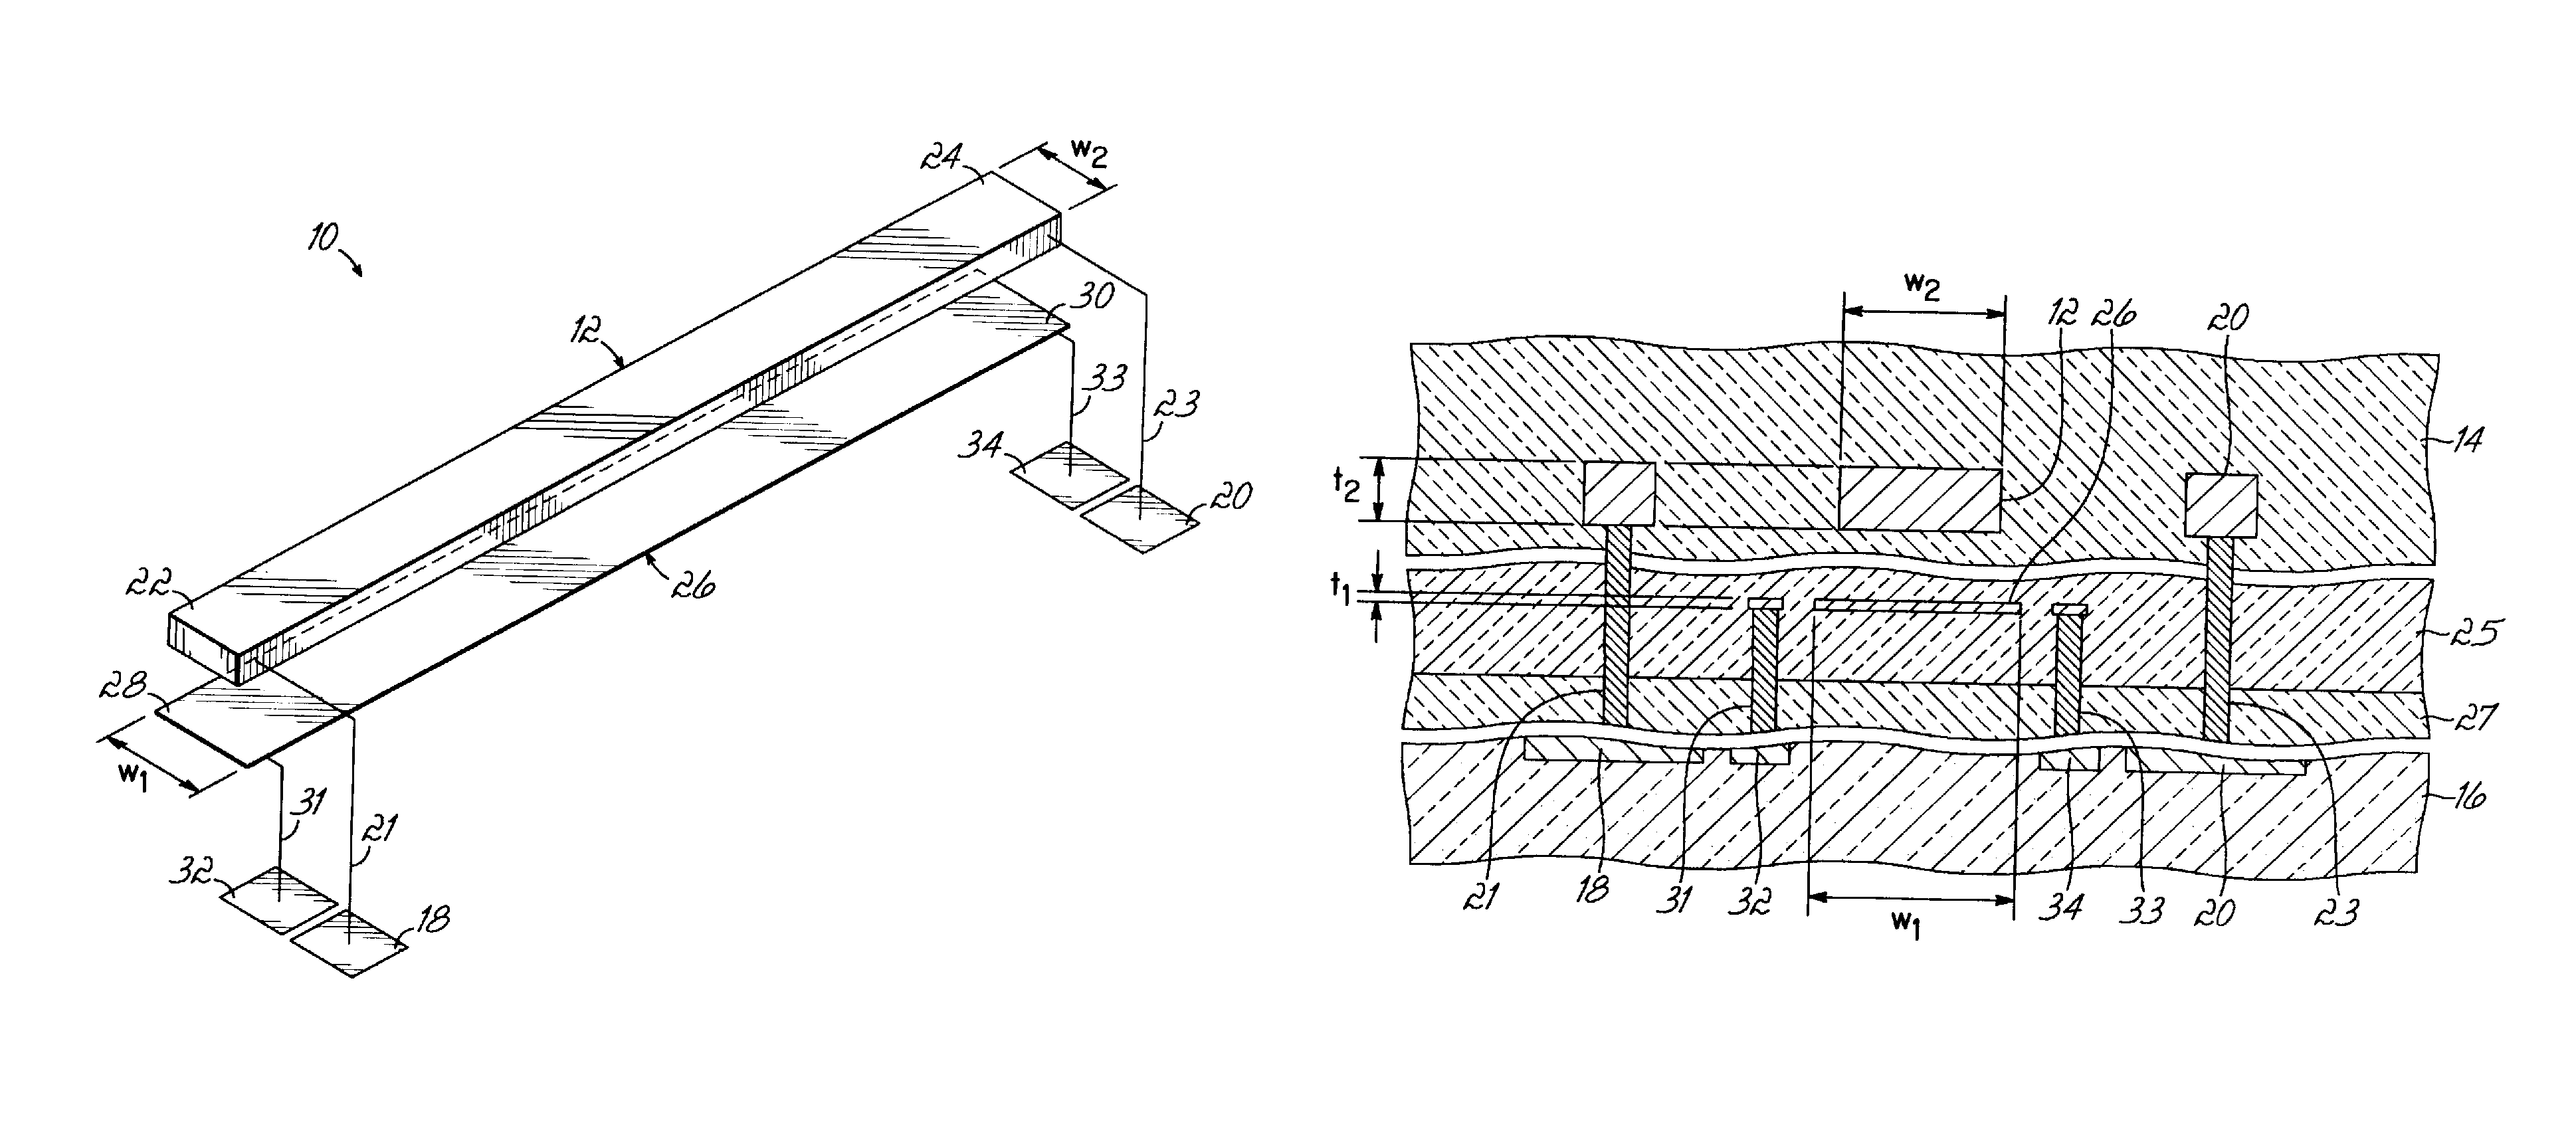 On-chip integrated voltage-controlled variable inductor, methods of making and tuning such variable inductors, and design structures integrating such variable inductors